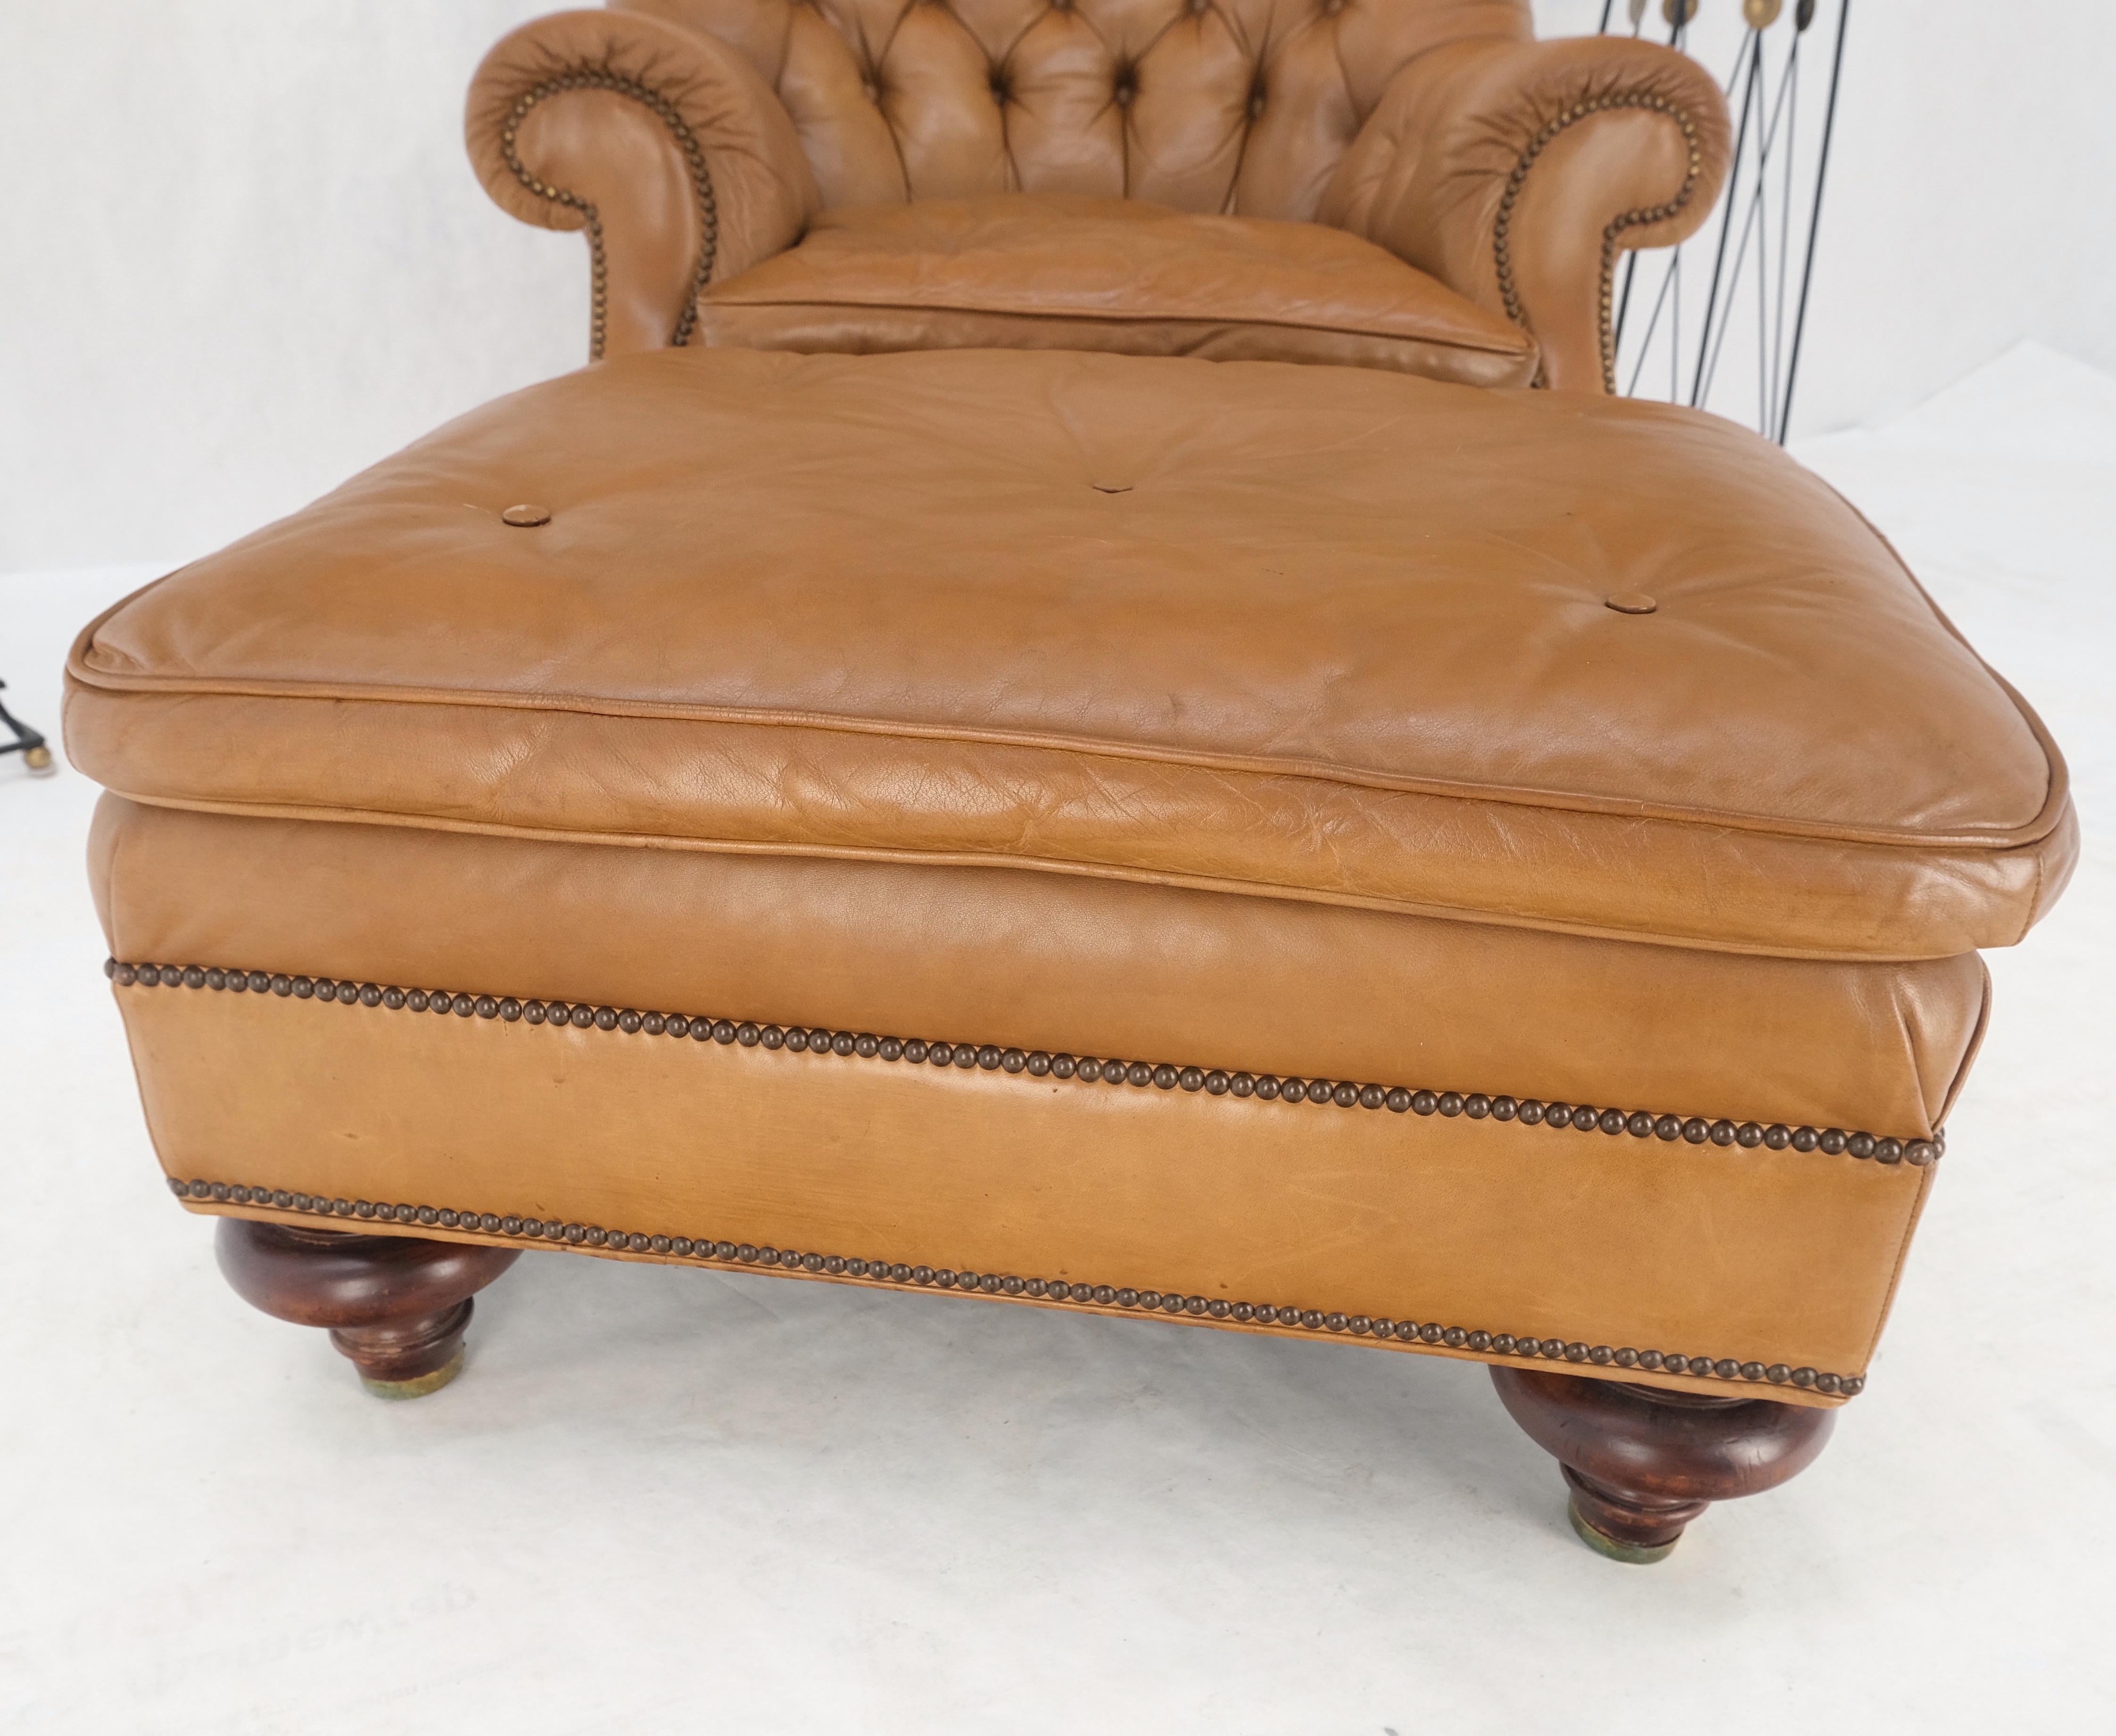 Baker Tan Leather Tufted Back Large Arm Chair w/ Ottoman Pouf Turned Legs MINT! In Good Condition For Sale In Rockaway, NJ